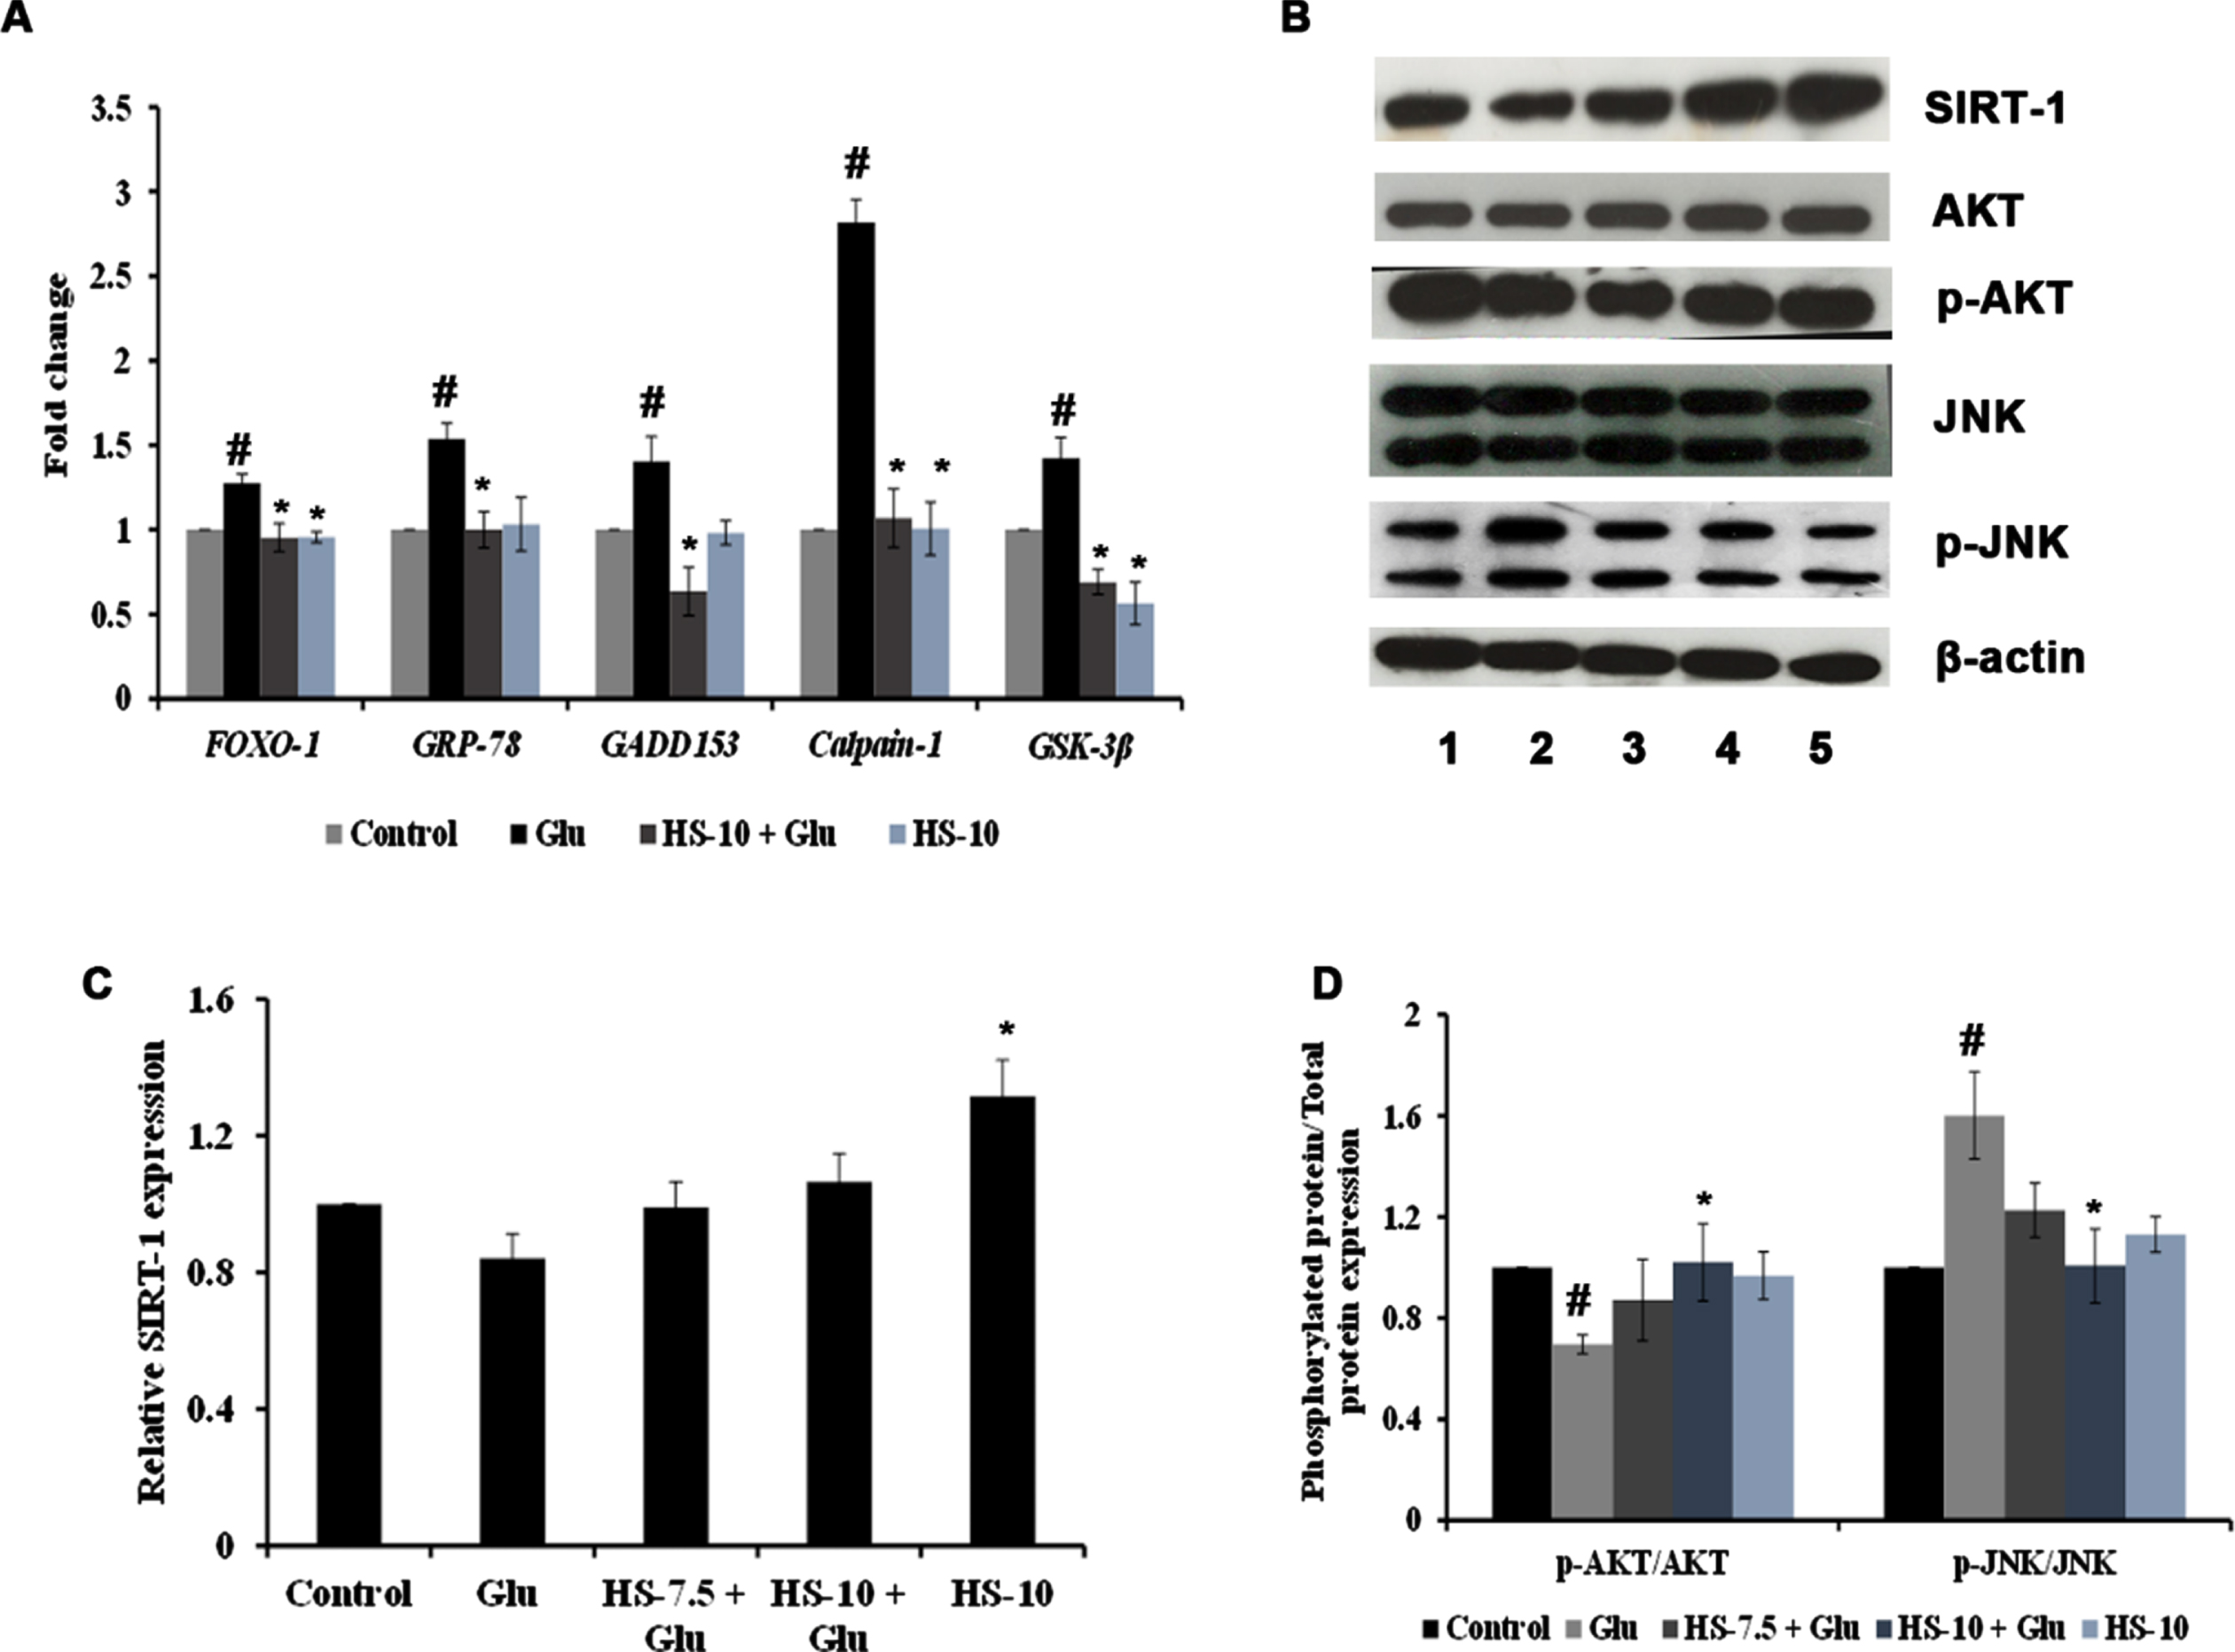 (A) Transcriptional regulation of genes involved in stress response by HS extract. (B) Representative blots showing the regulation of protein expression involved in cell signaling by HS extract (Lane: 1- Control; 2- High glucose; 3- HS-7.5 (pre-treatment 2 h) + high glucose; 4- HS-10 (pre-treatment 2 h) + high glucose; 5- HS-10) (C) Quantification of relative expression of SIRT-1 (D) Ratio of phosphorylated protein to total protein expression (p-AKT/AKT and P-JNK/JNK) (Significance at p < 0.05; # Control vs high glucose; * high glucose vs HS pre-treated; n = 3).